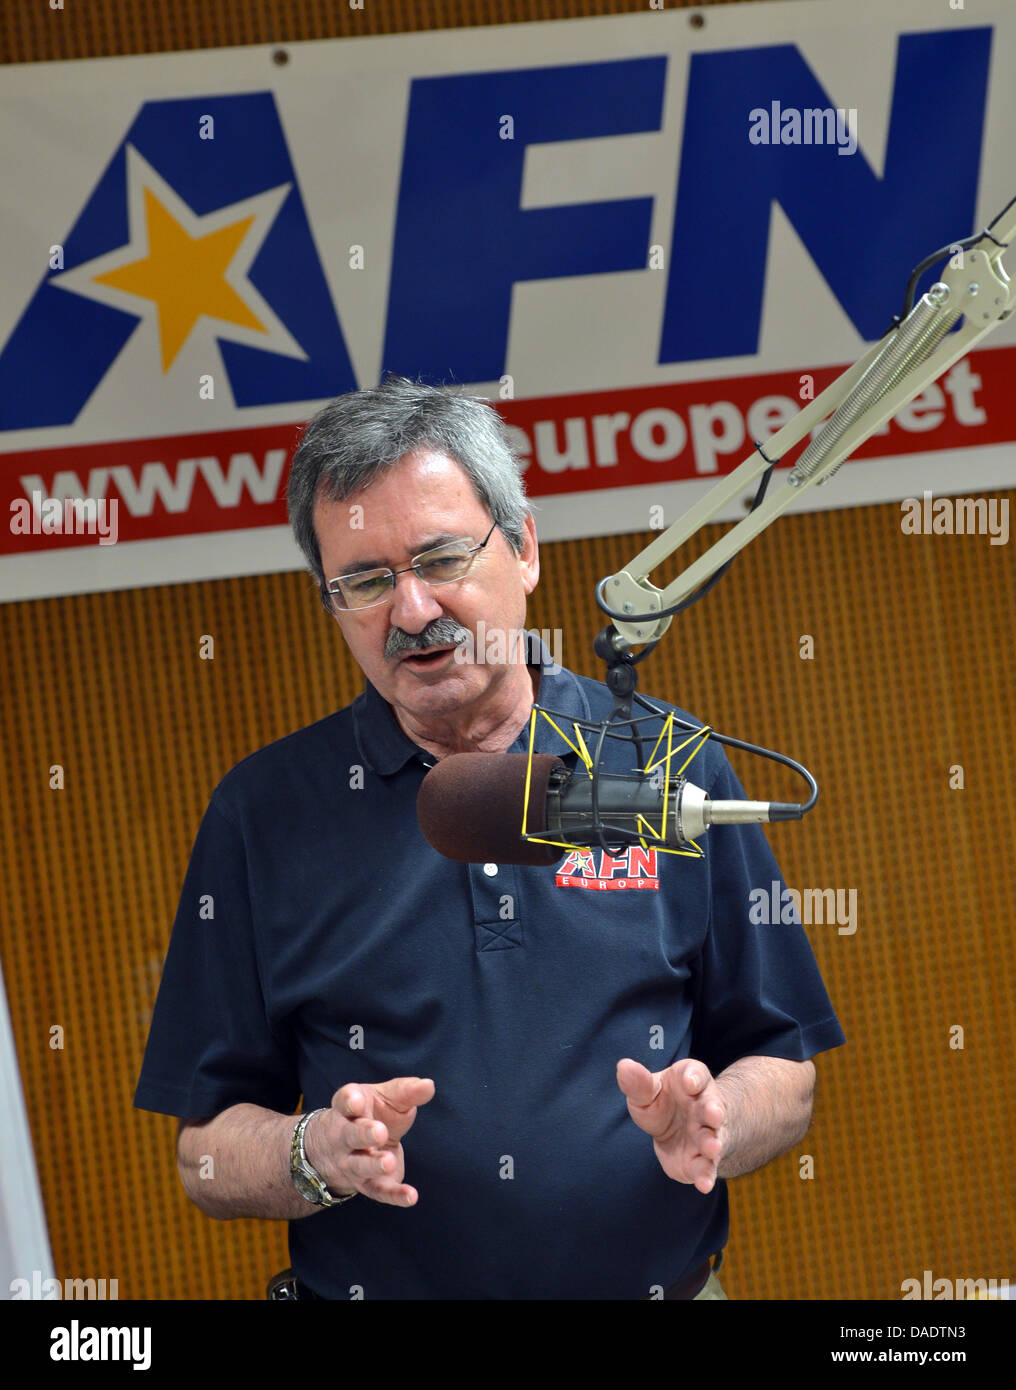 The head of the US Armed Forces Network AFN, Gary Bautell, stands in a broadcasting studio  in Wiesbaden-Erbenheim, Germany, 11 July 2013. AFN was founded and first went on air in July 1943 setting up local radion stations first in Europe and subesquently around the world where US troops were deployed. Photo: Arne Dedert Stock Photo